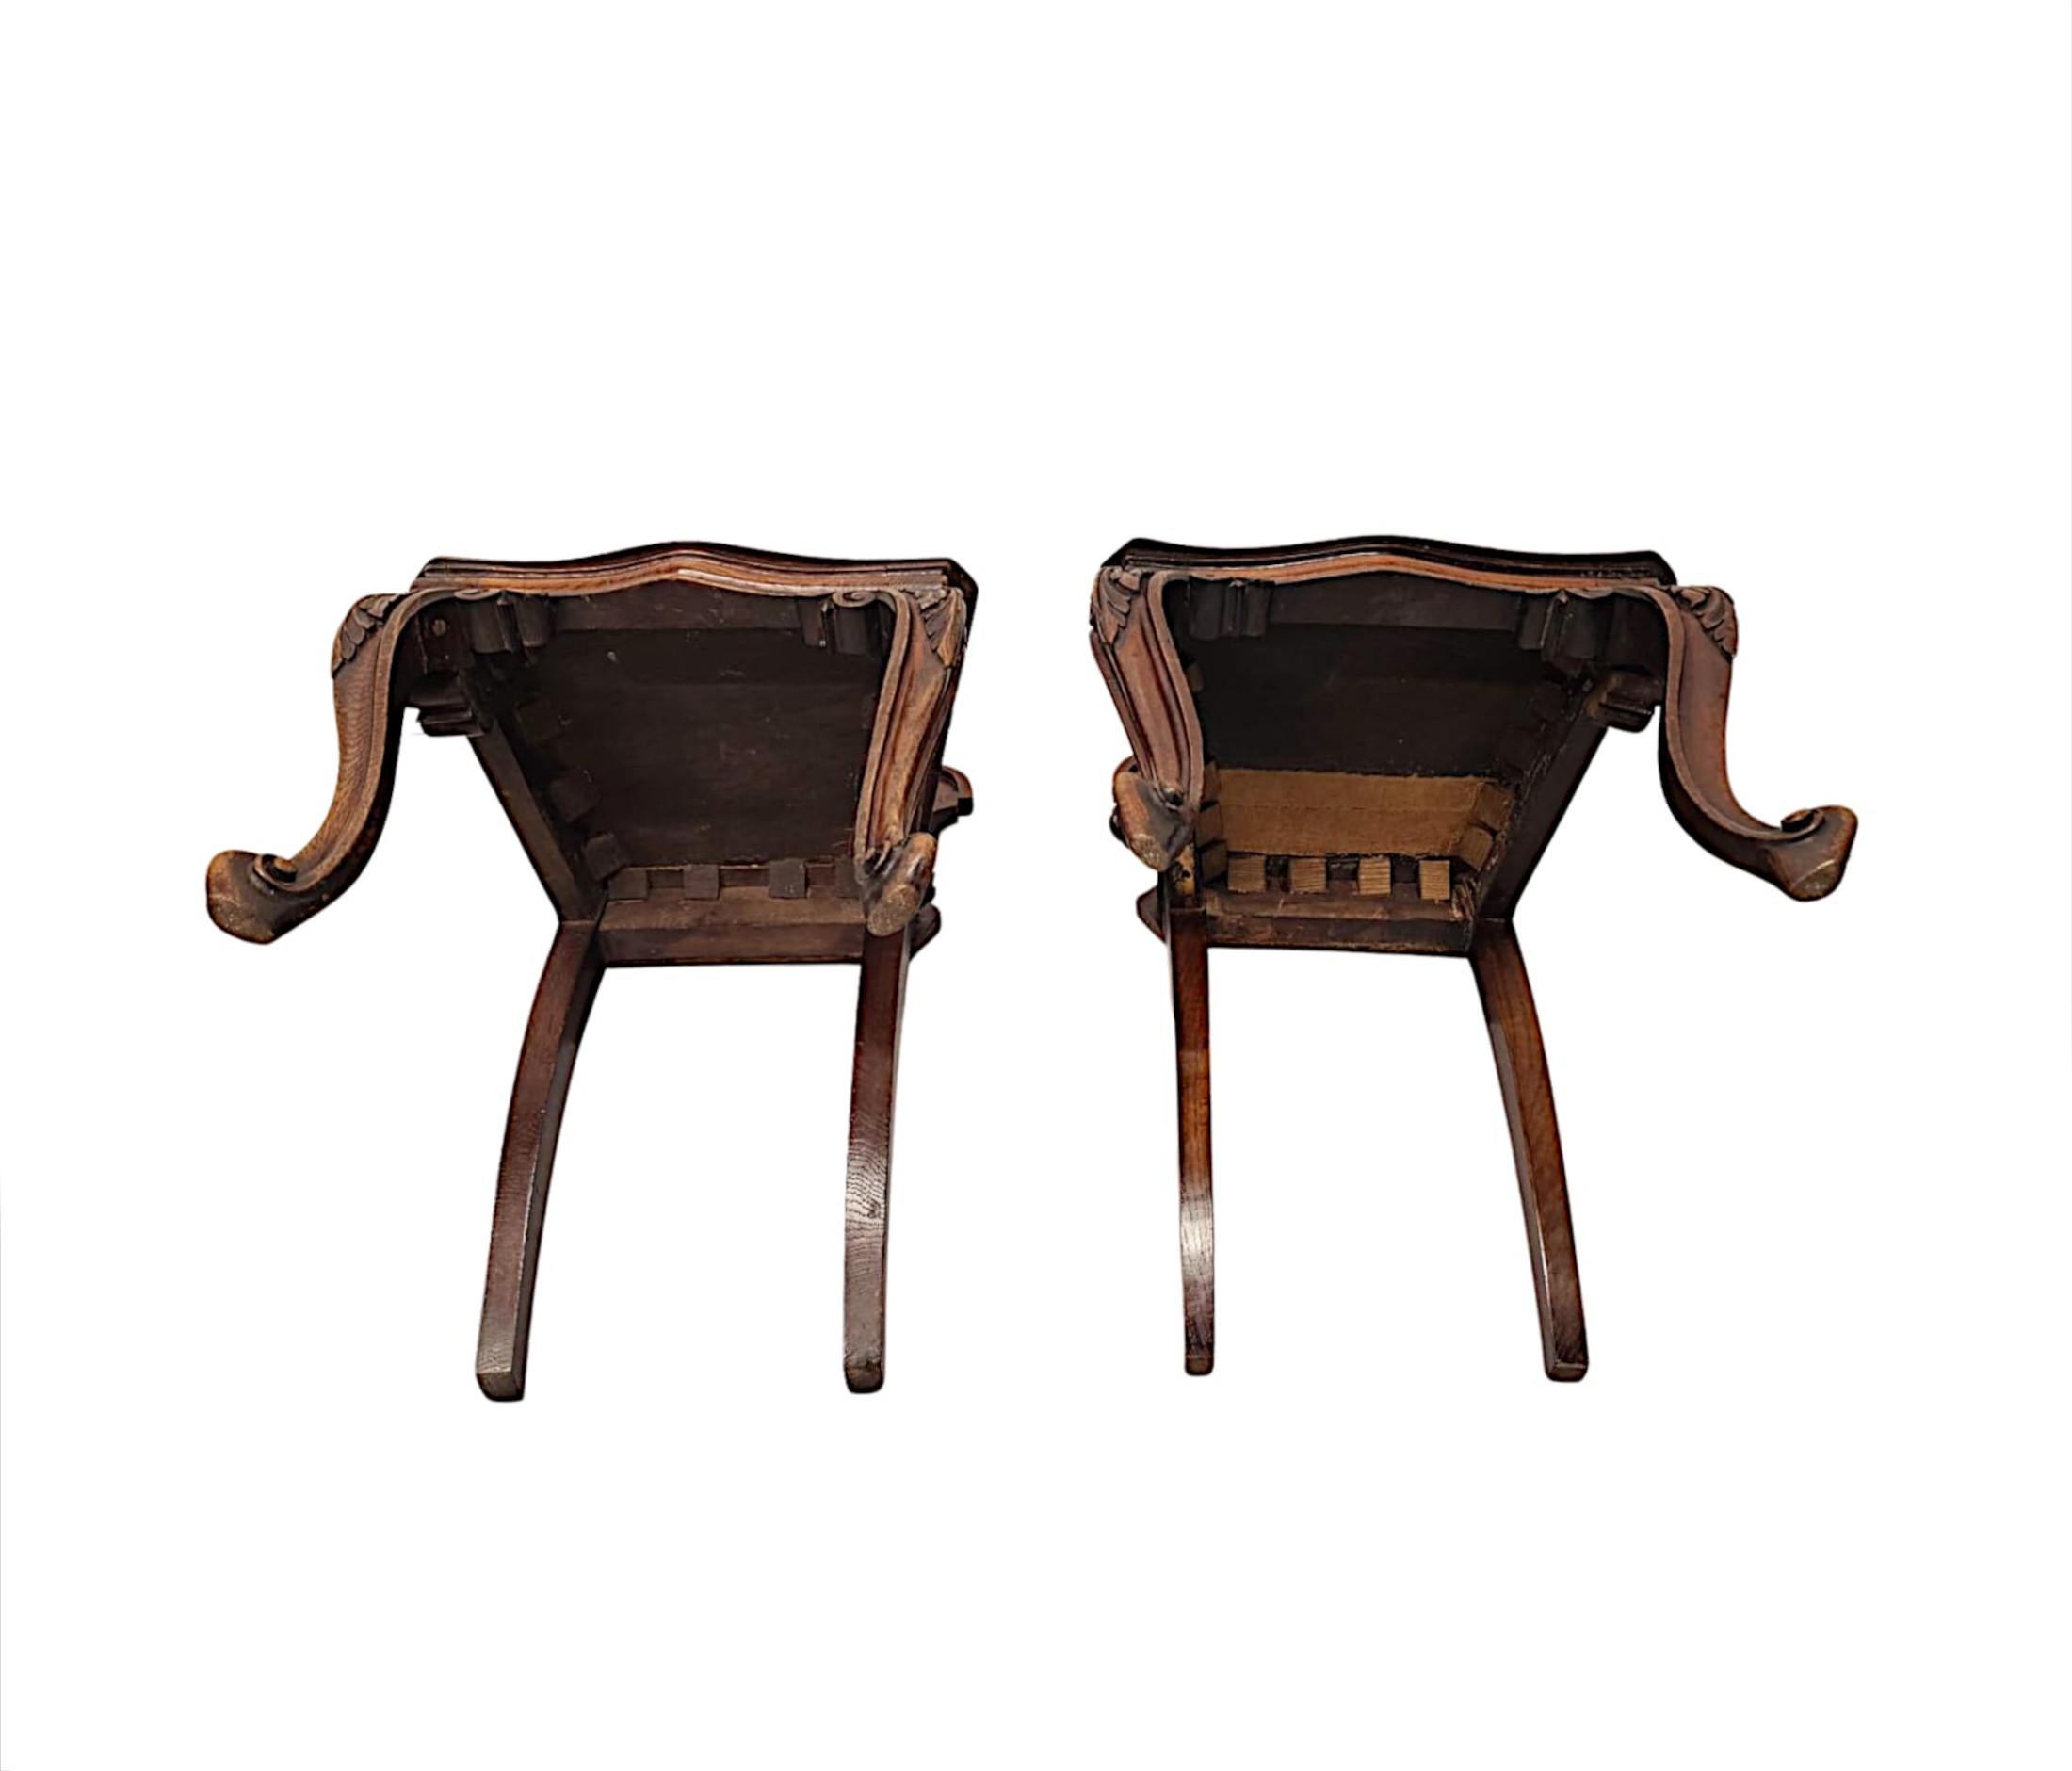  A Fabulous Pair of 19th Century Oak Hall Chairs For Sale 3